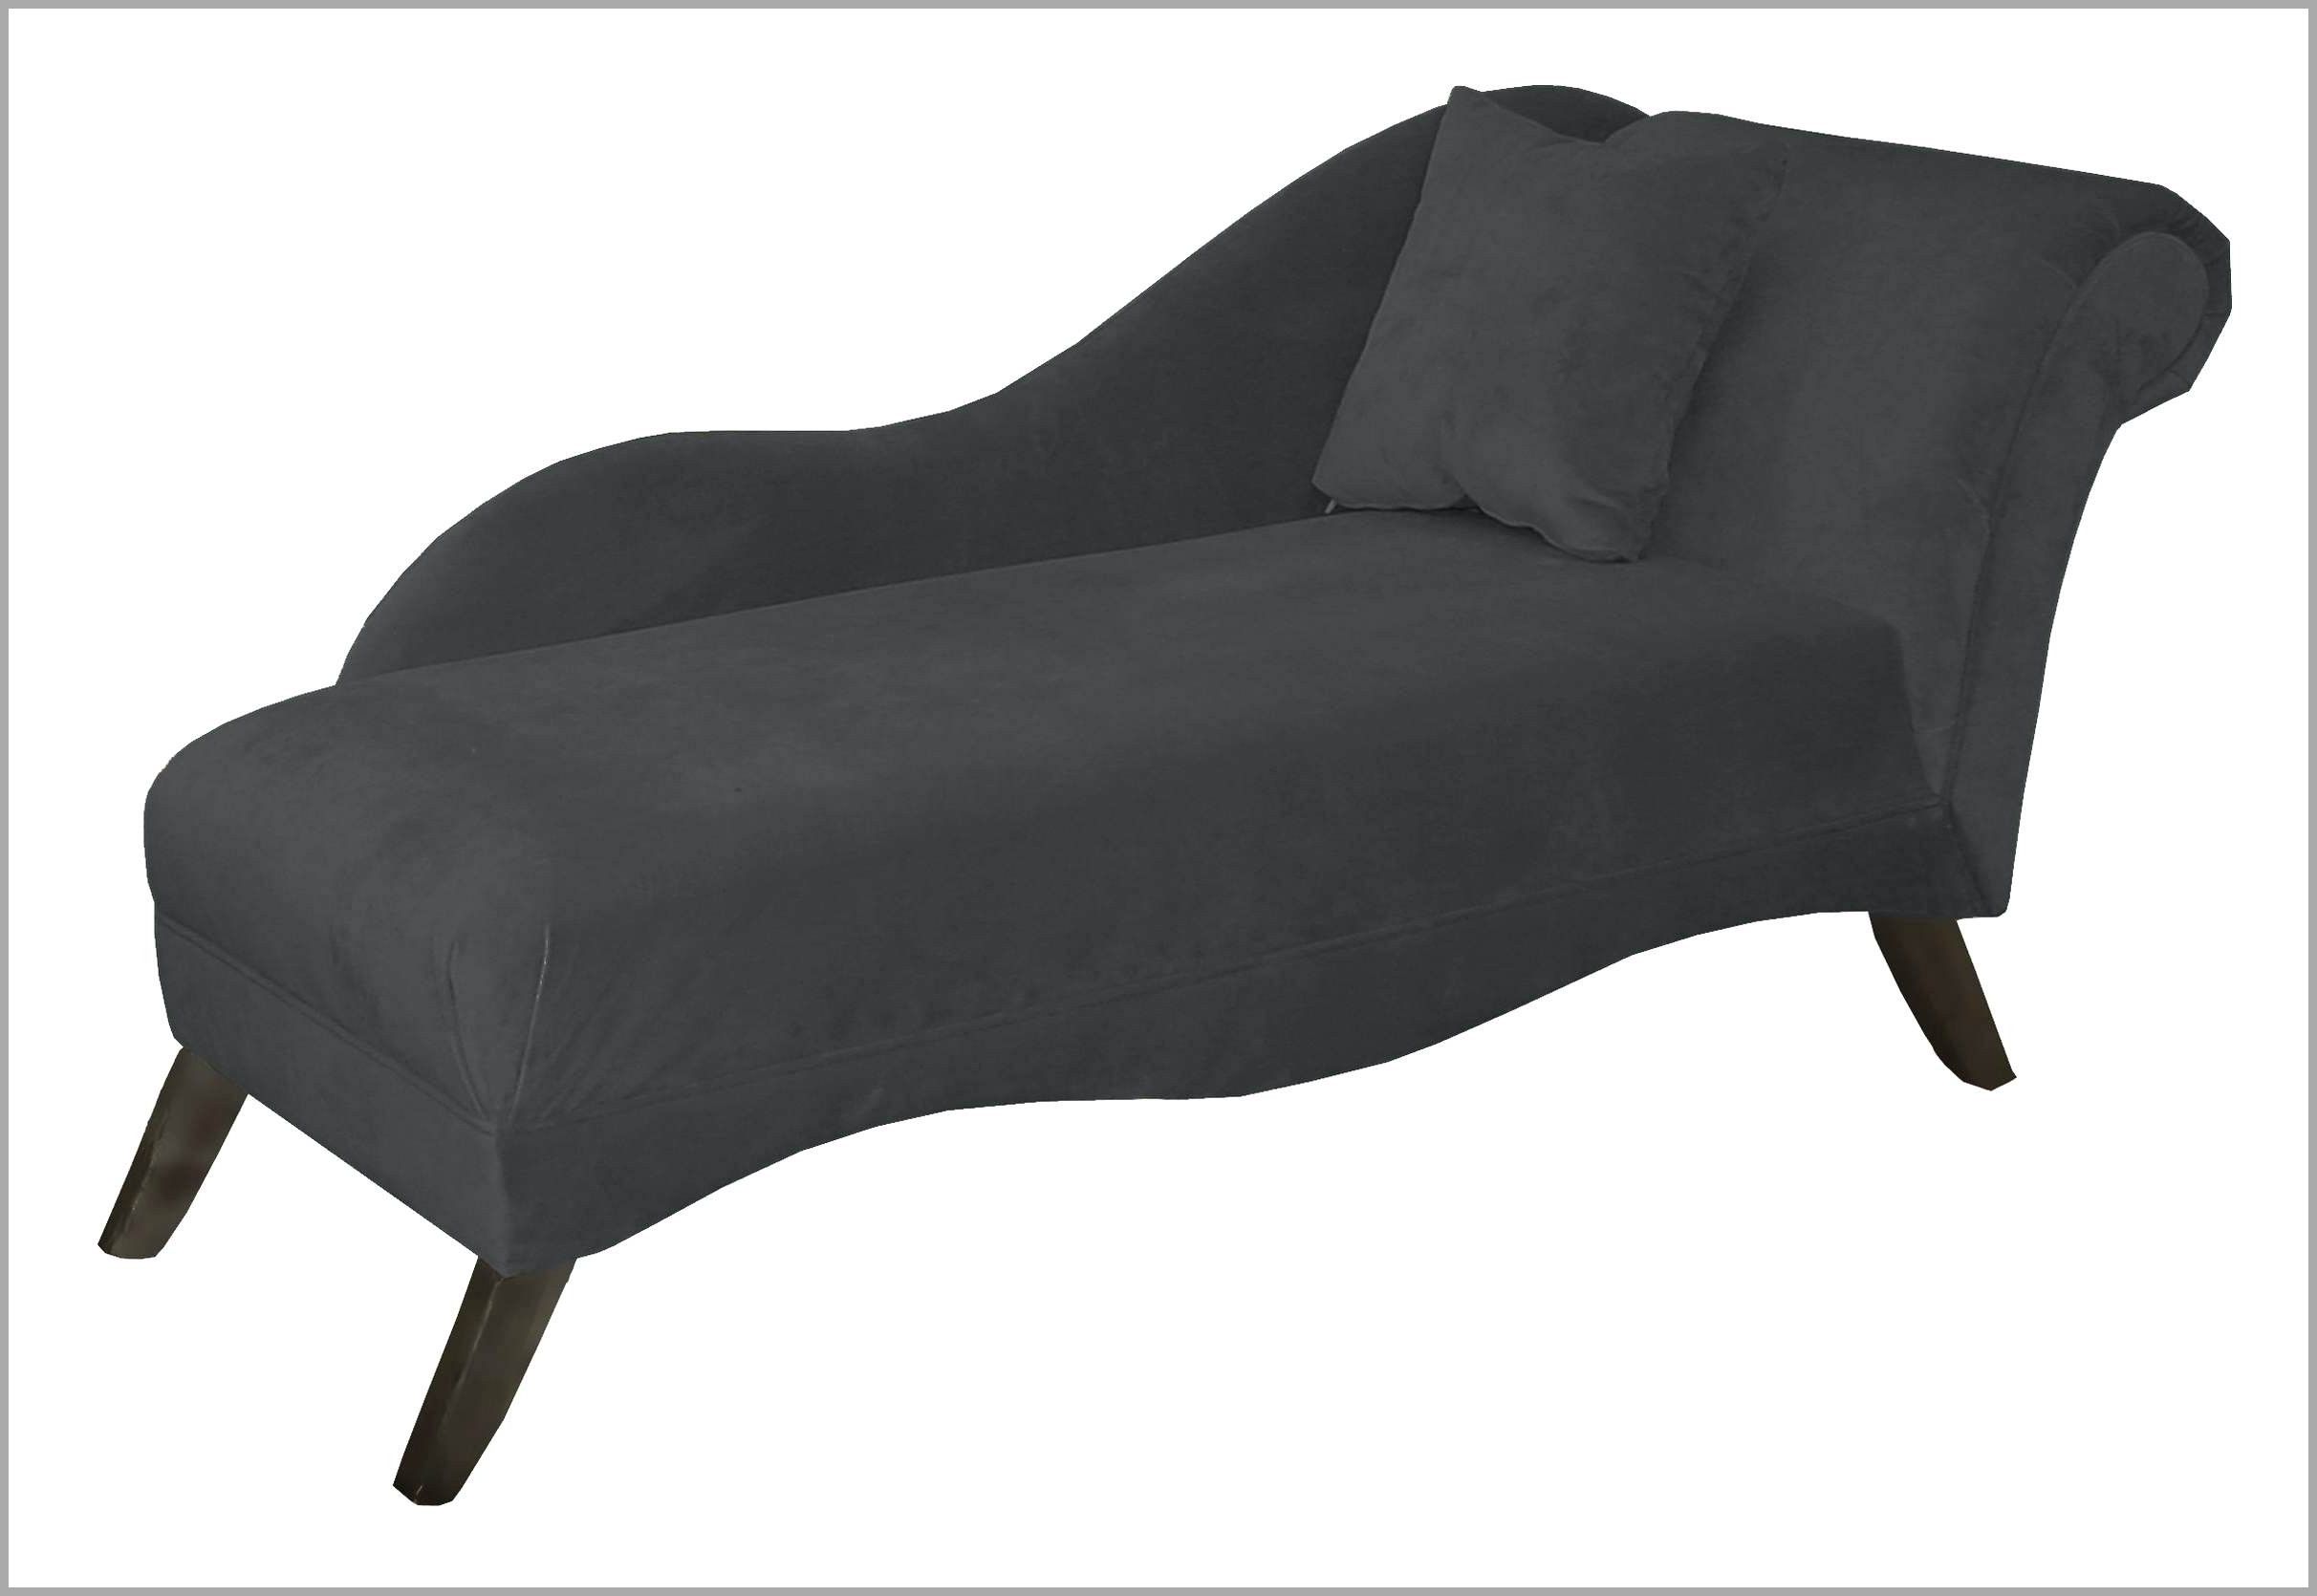 Current Agreeable Chaise Lounge Chair Walmart About Mainstays Ashwood Within Walmart Chaise Lounges (View 8 of 15)